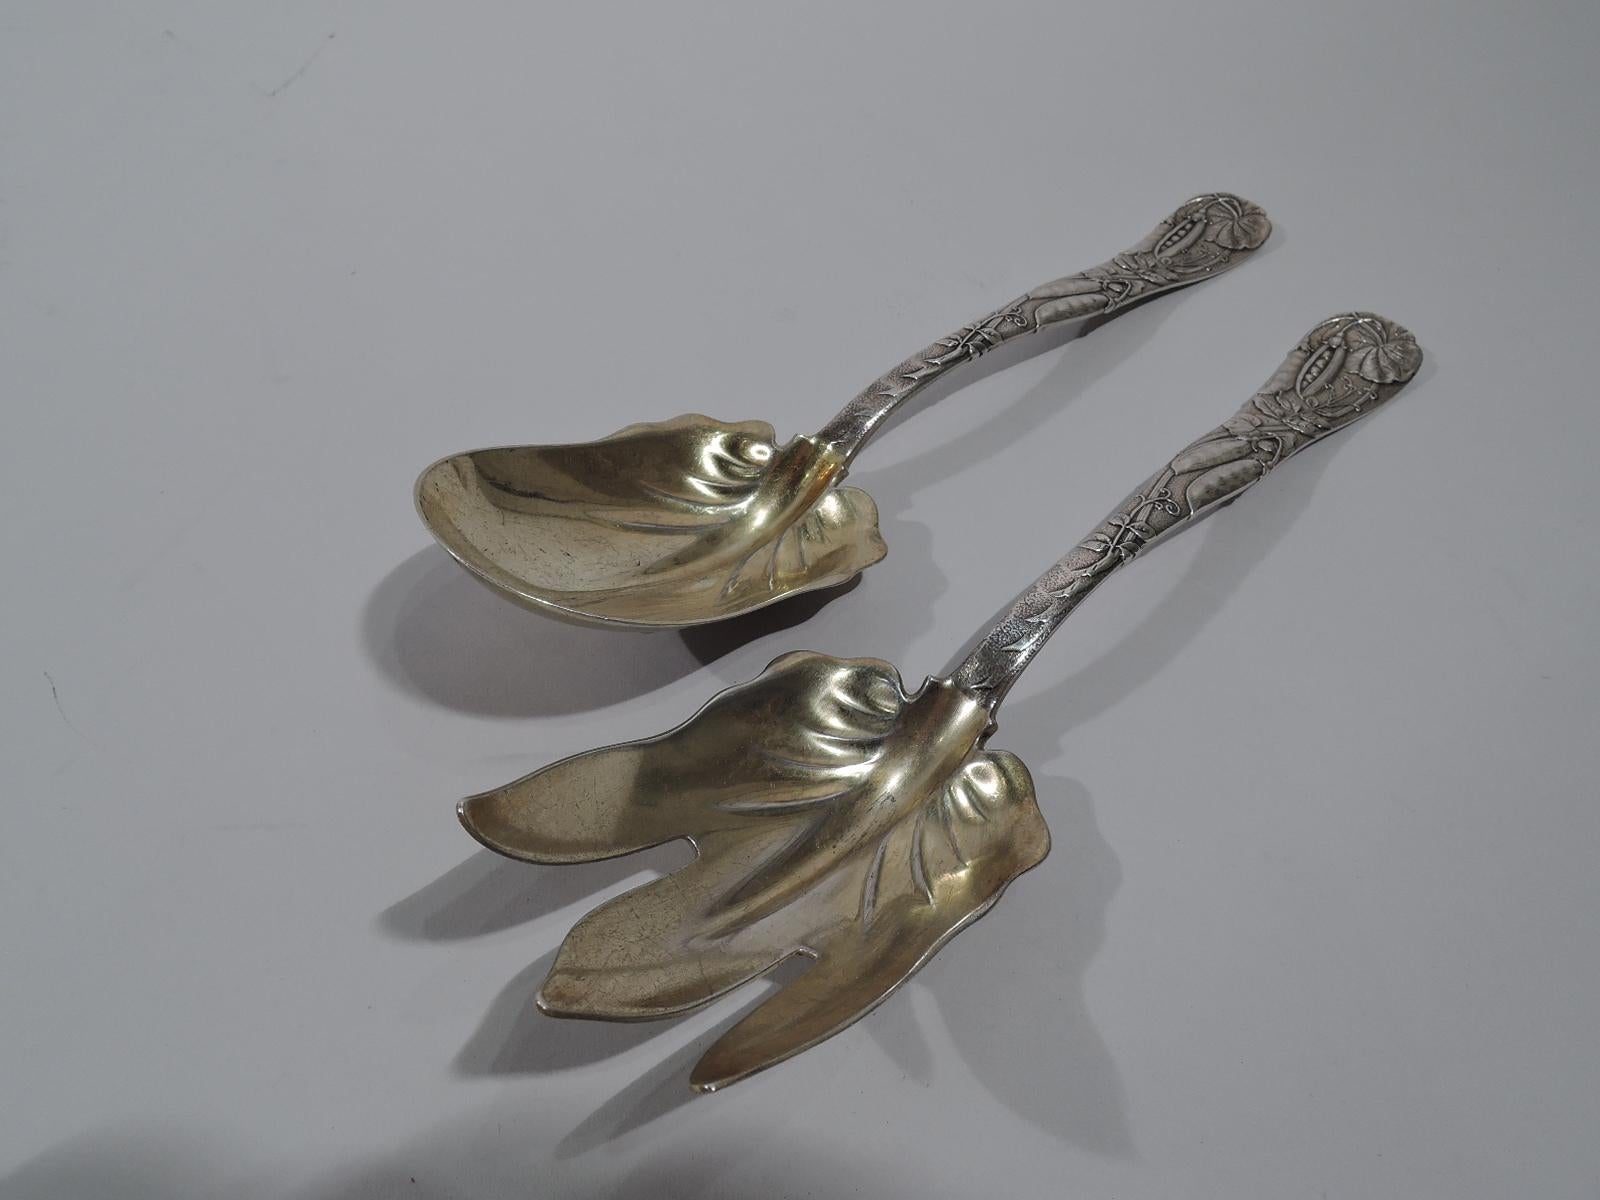 Very desirable sterling silver salad serving pair in Vine. Made by Tiffany & Co. in New York. This pair comprises spoon and fork. Each: Loosely arranged wraparound pea pod vine on tapering and gently waving handle. Bowl and shank gilt-washed with